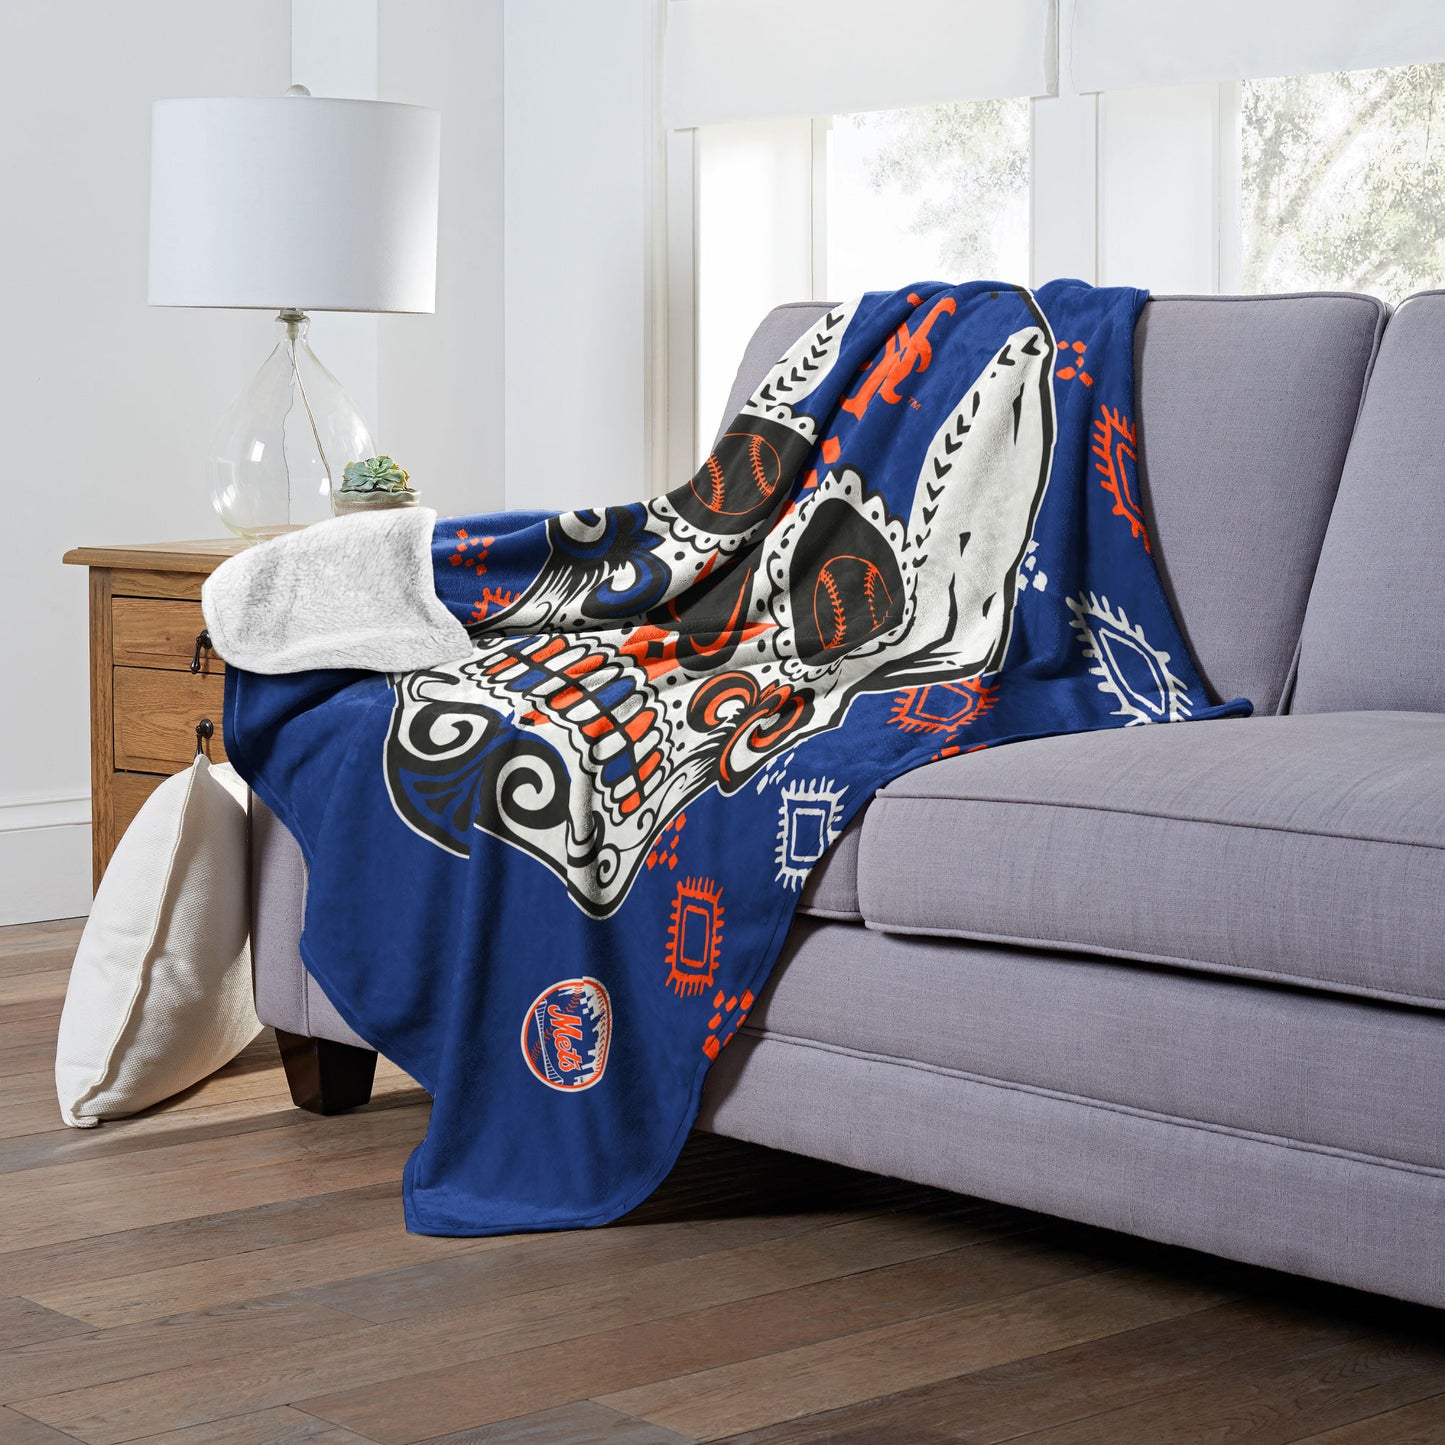 CANDY SKULL - METS Silk Touch Sherpa Blanket 50"x60"